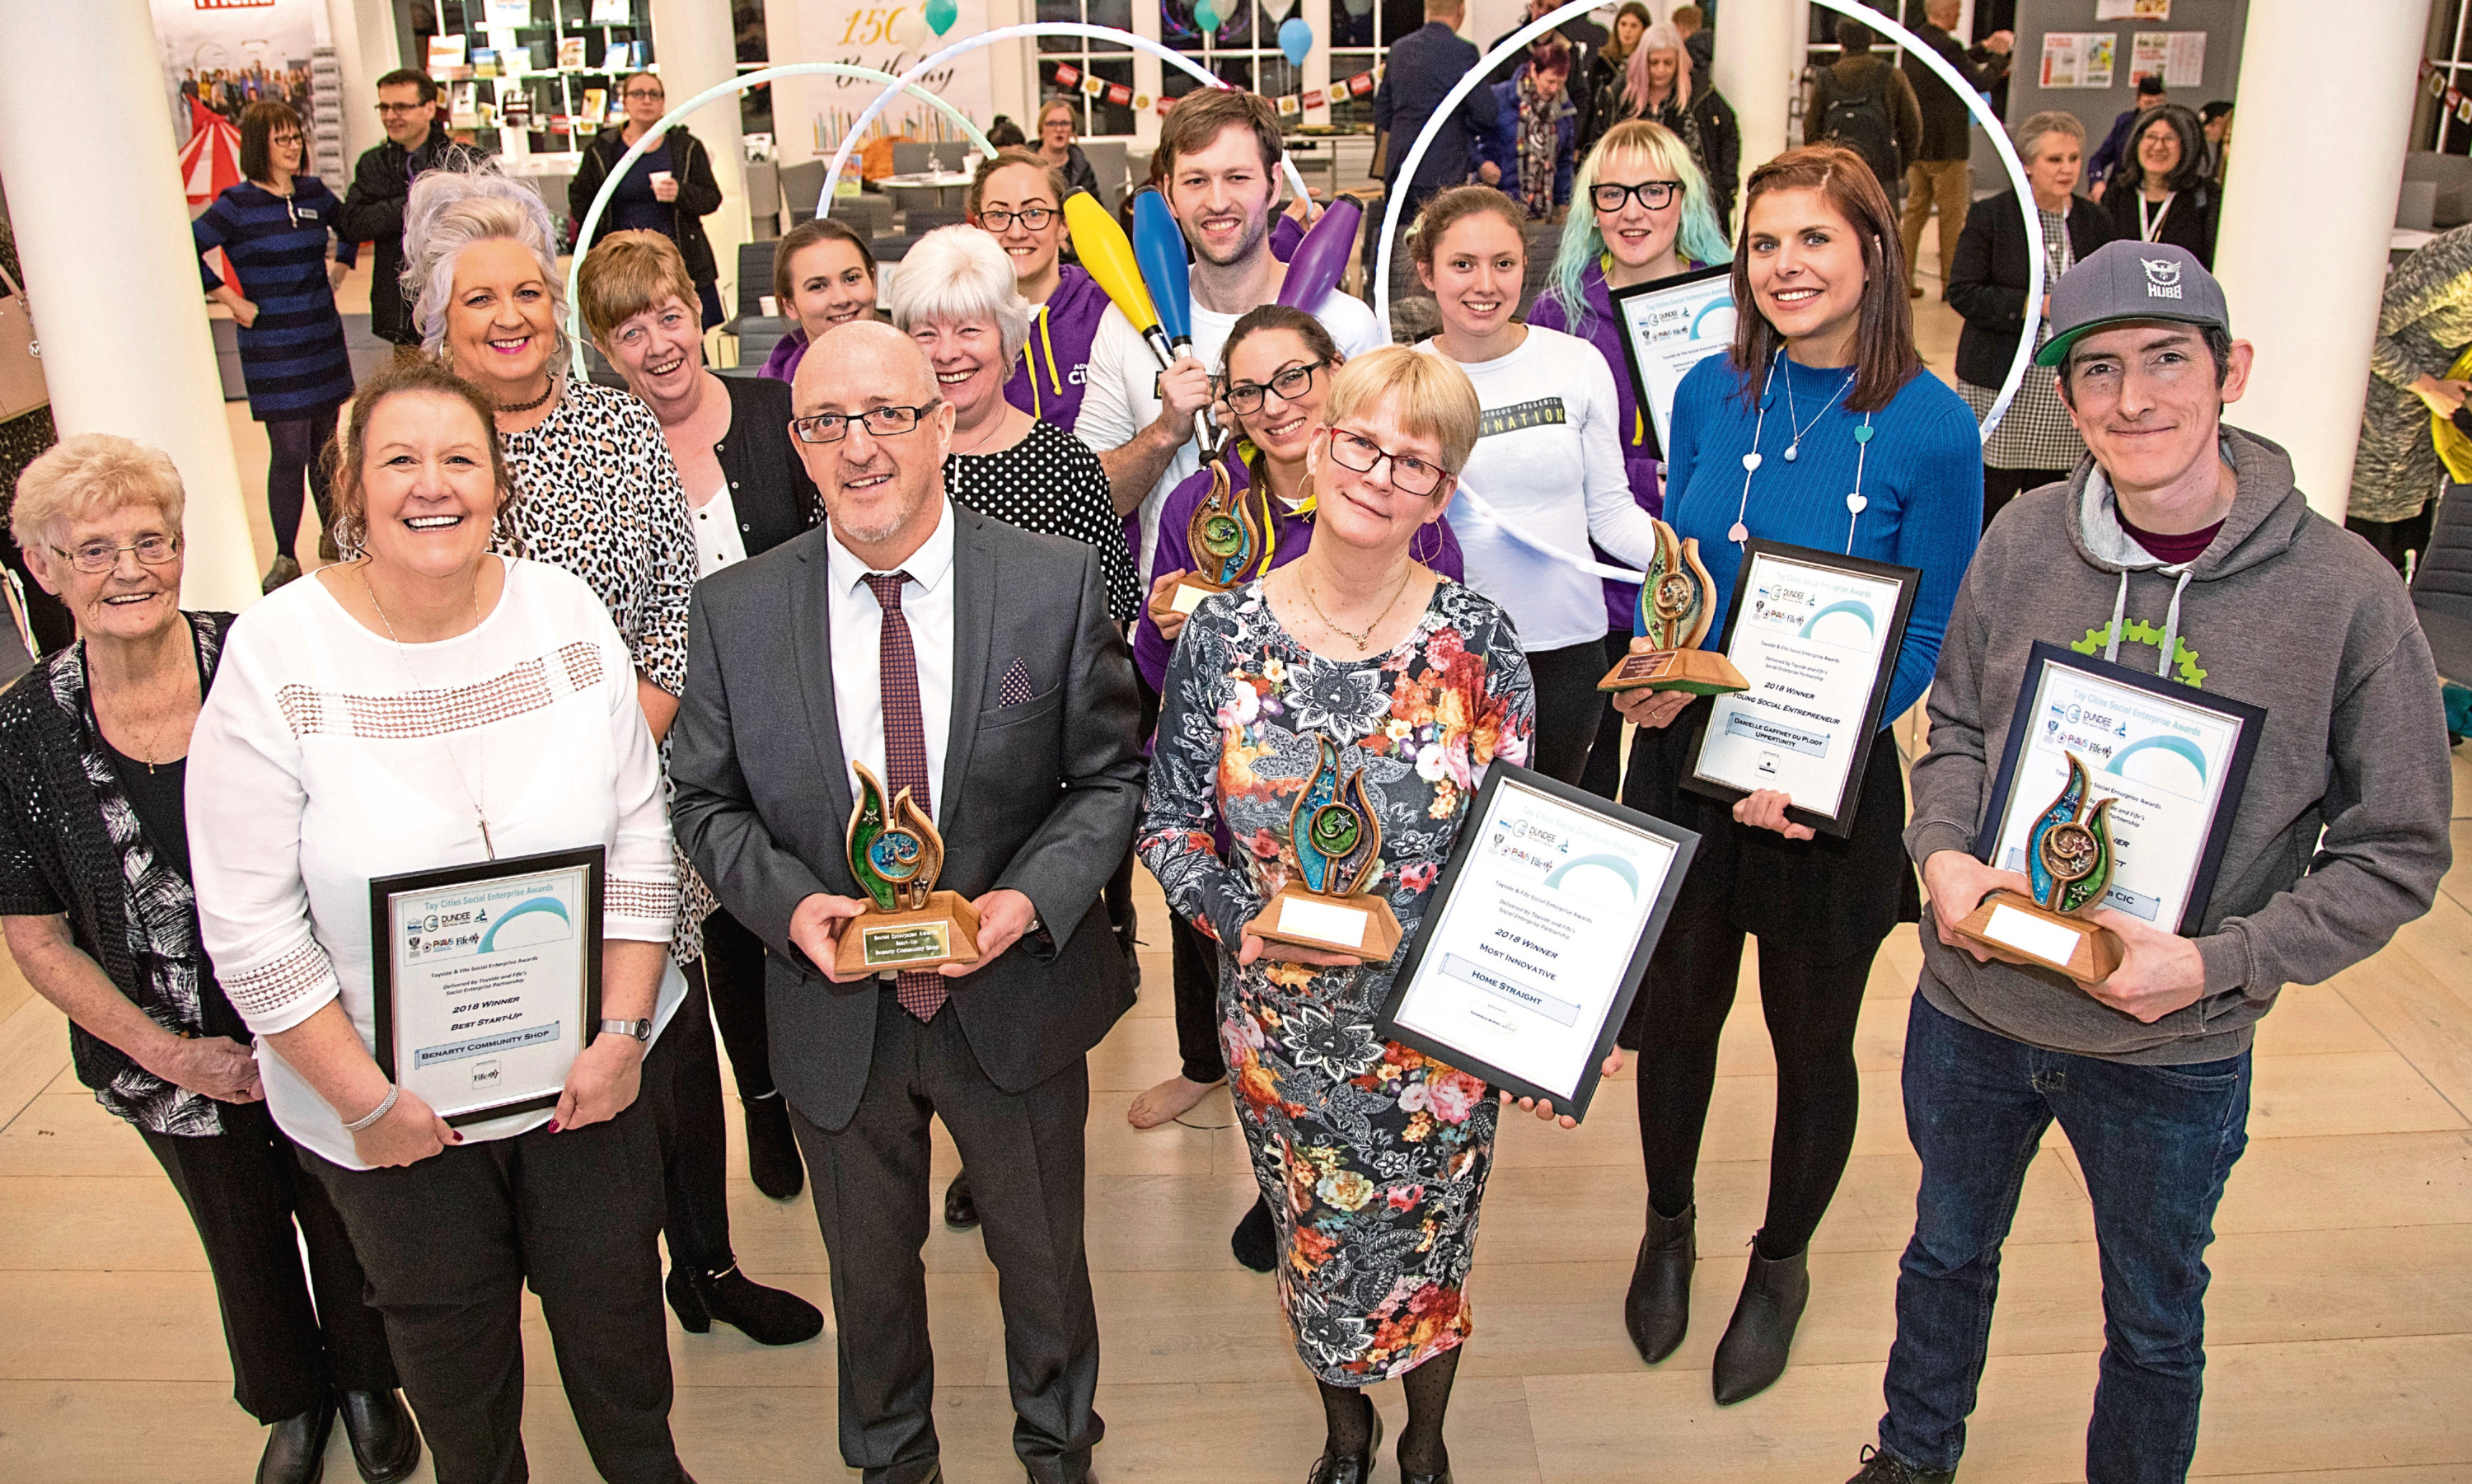 Some of the award winners at the event. Picture: Emma Alexander.